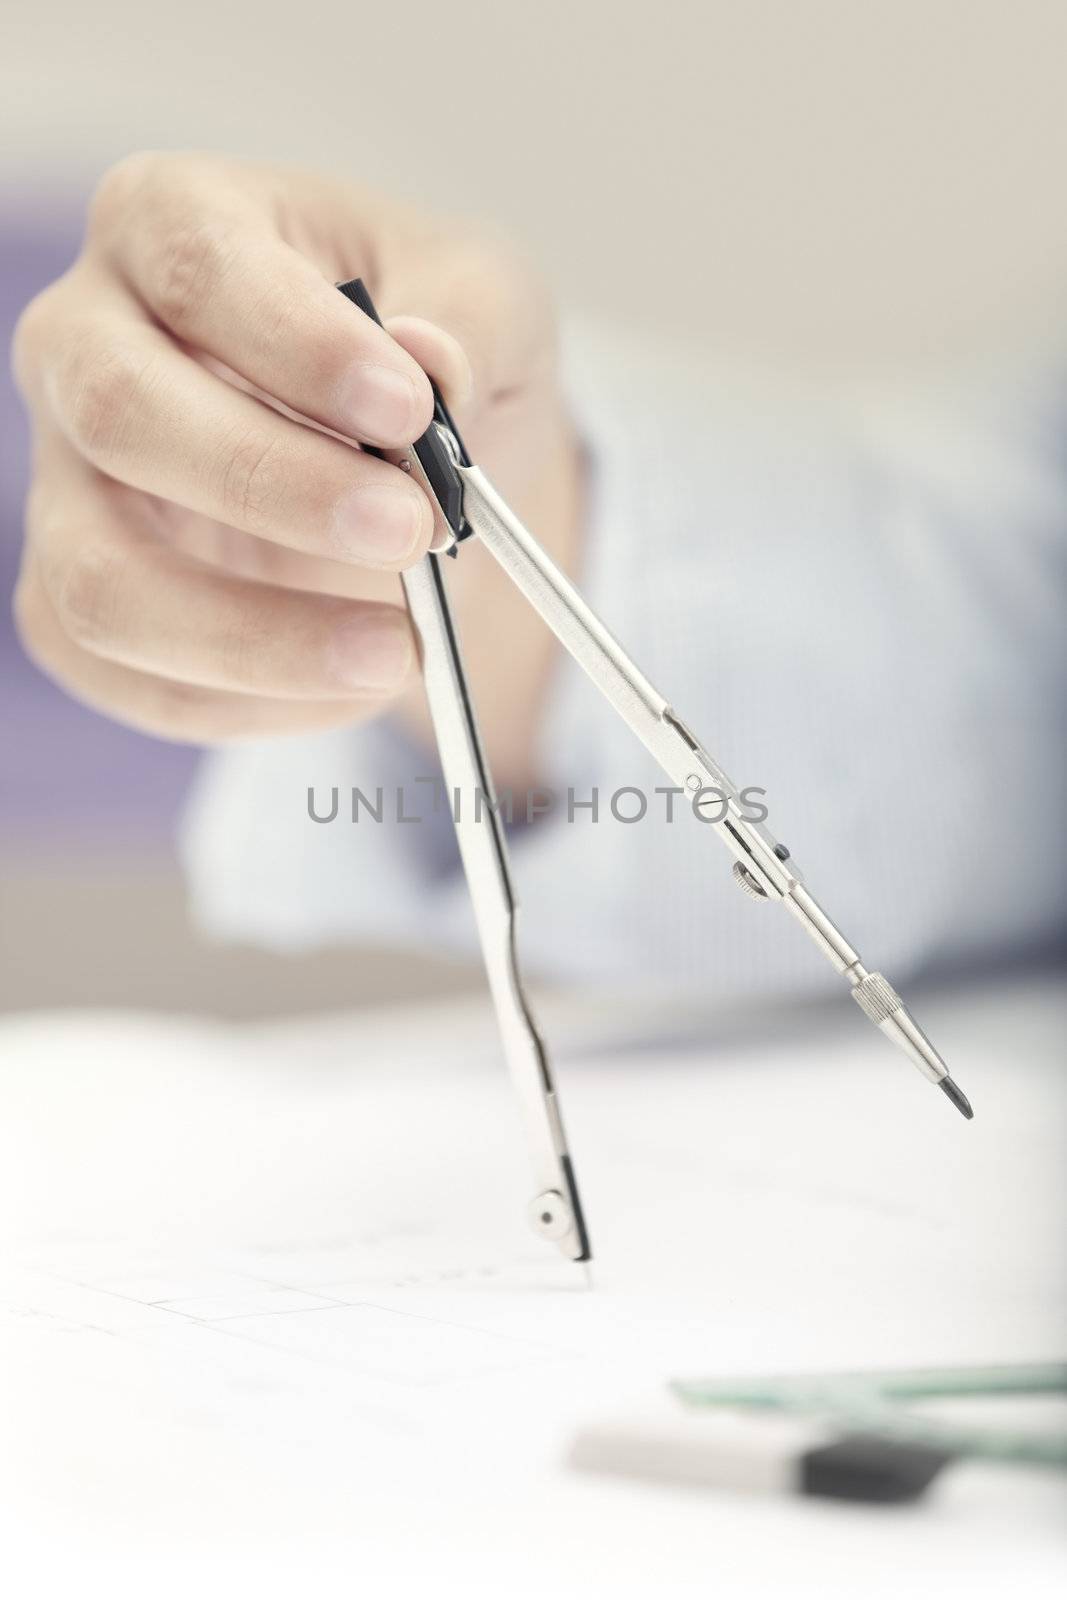 Hand of engineer working with compasses